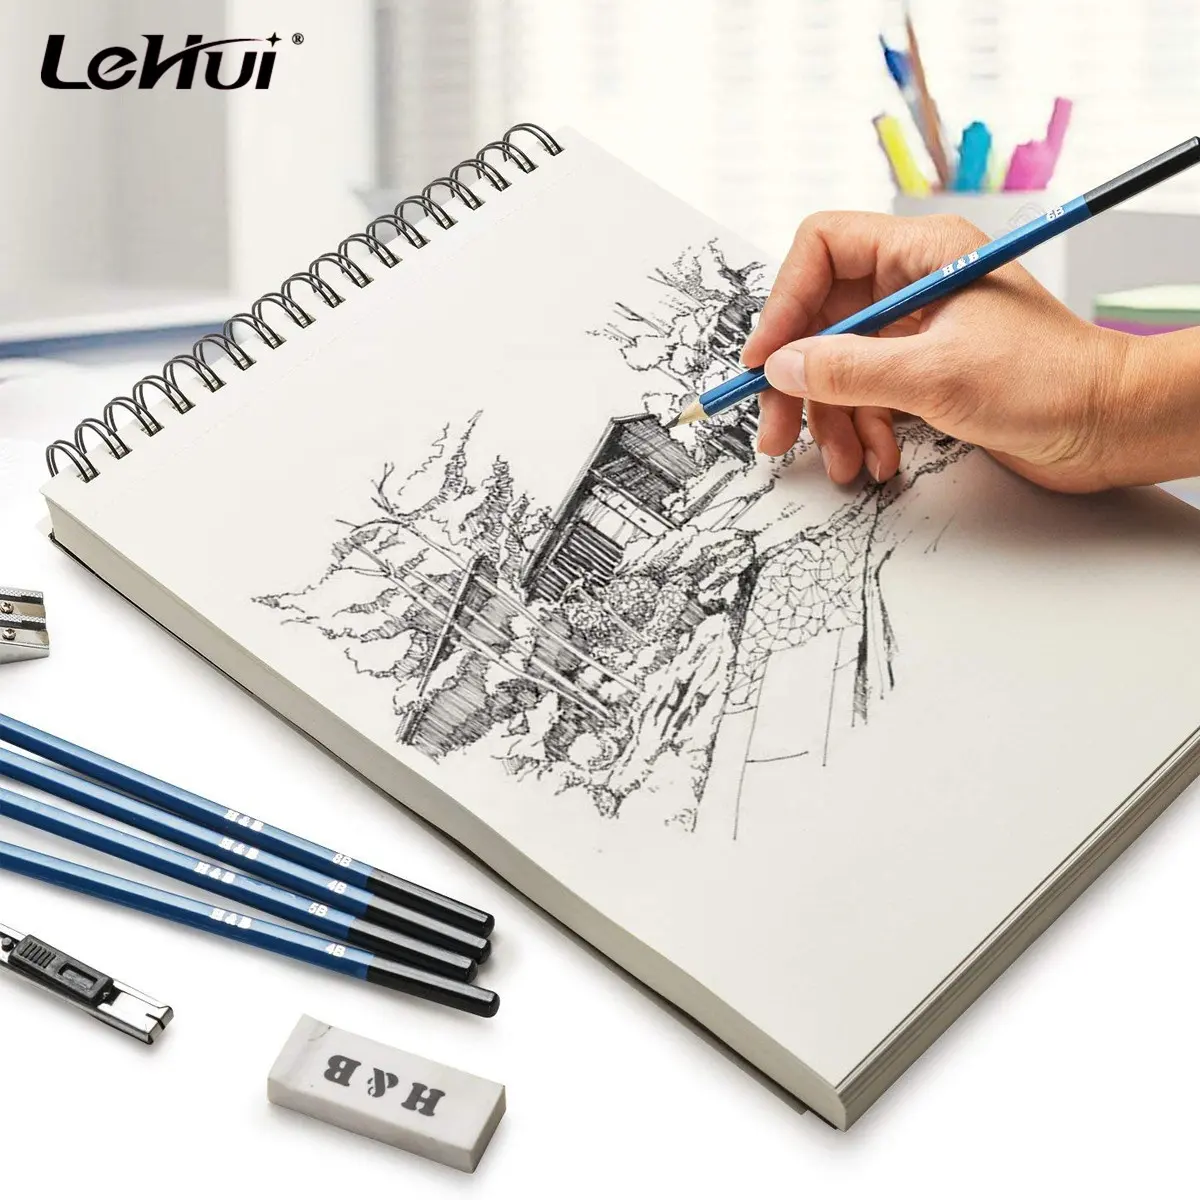 Lehui Hot Sale 9 X 12 inches 100 Sheets Art Drawing Pad Sketch Book Notebook